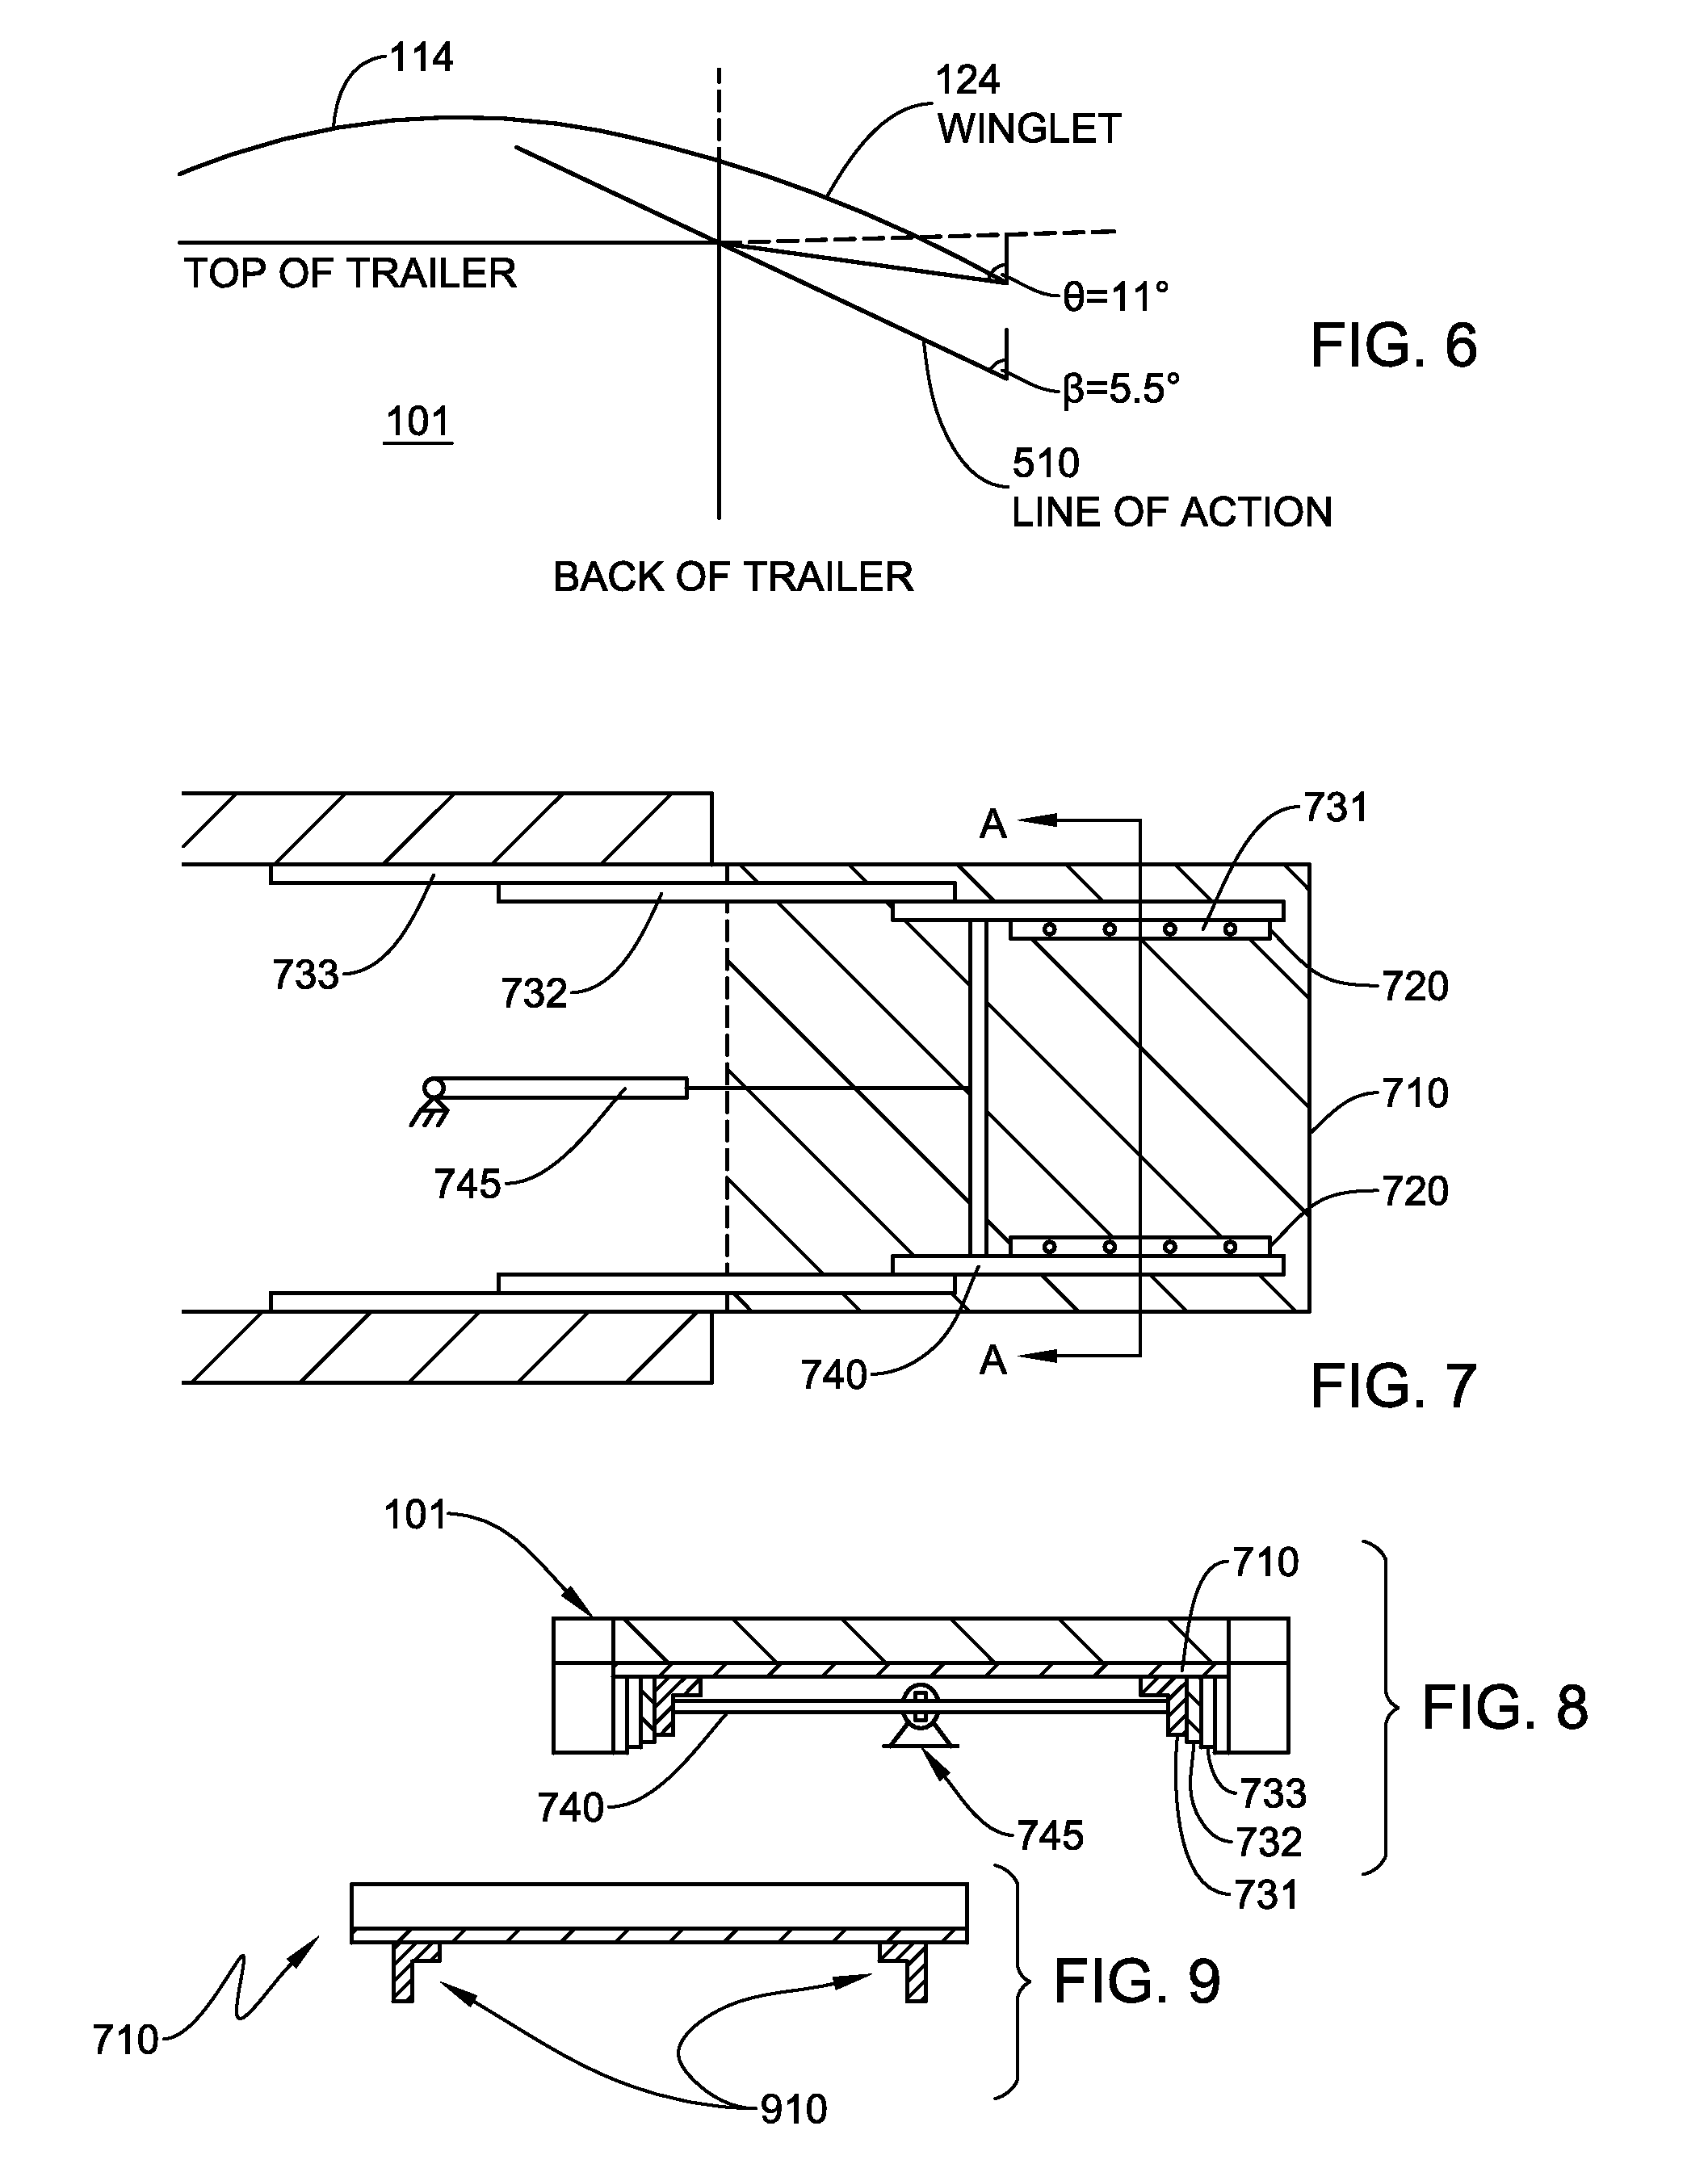 Rear-mounted retractable aerodynamic structure for cargo bodies